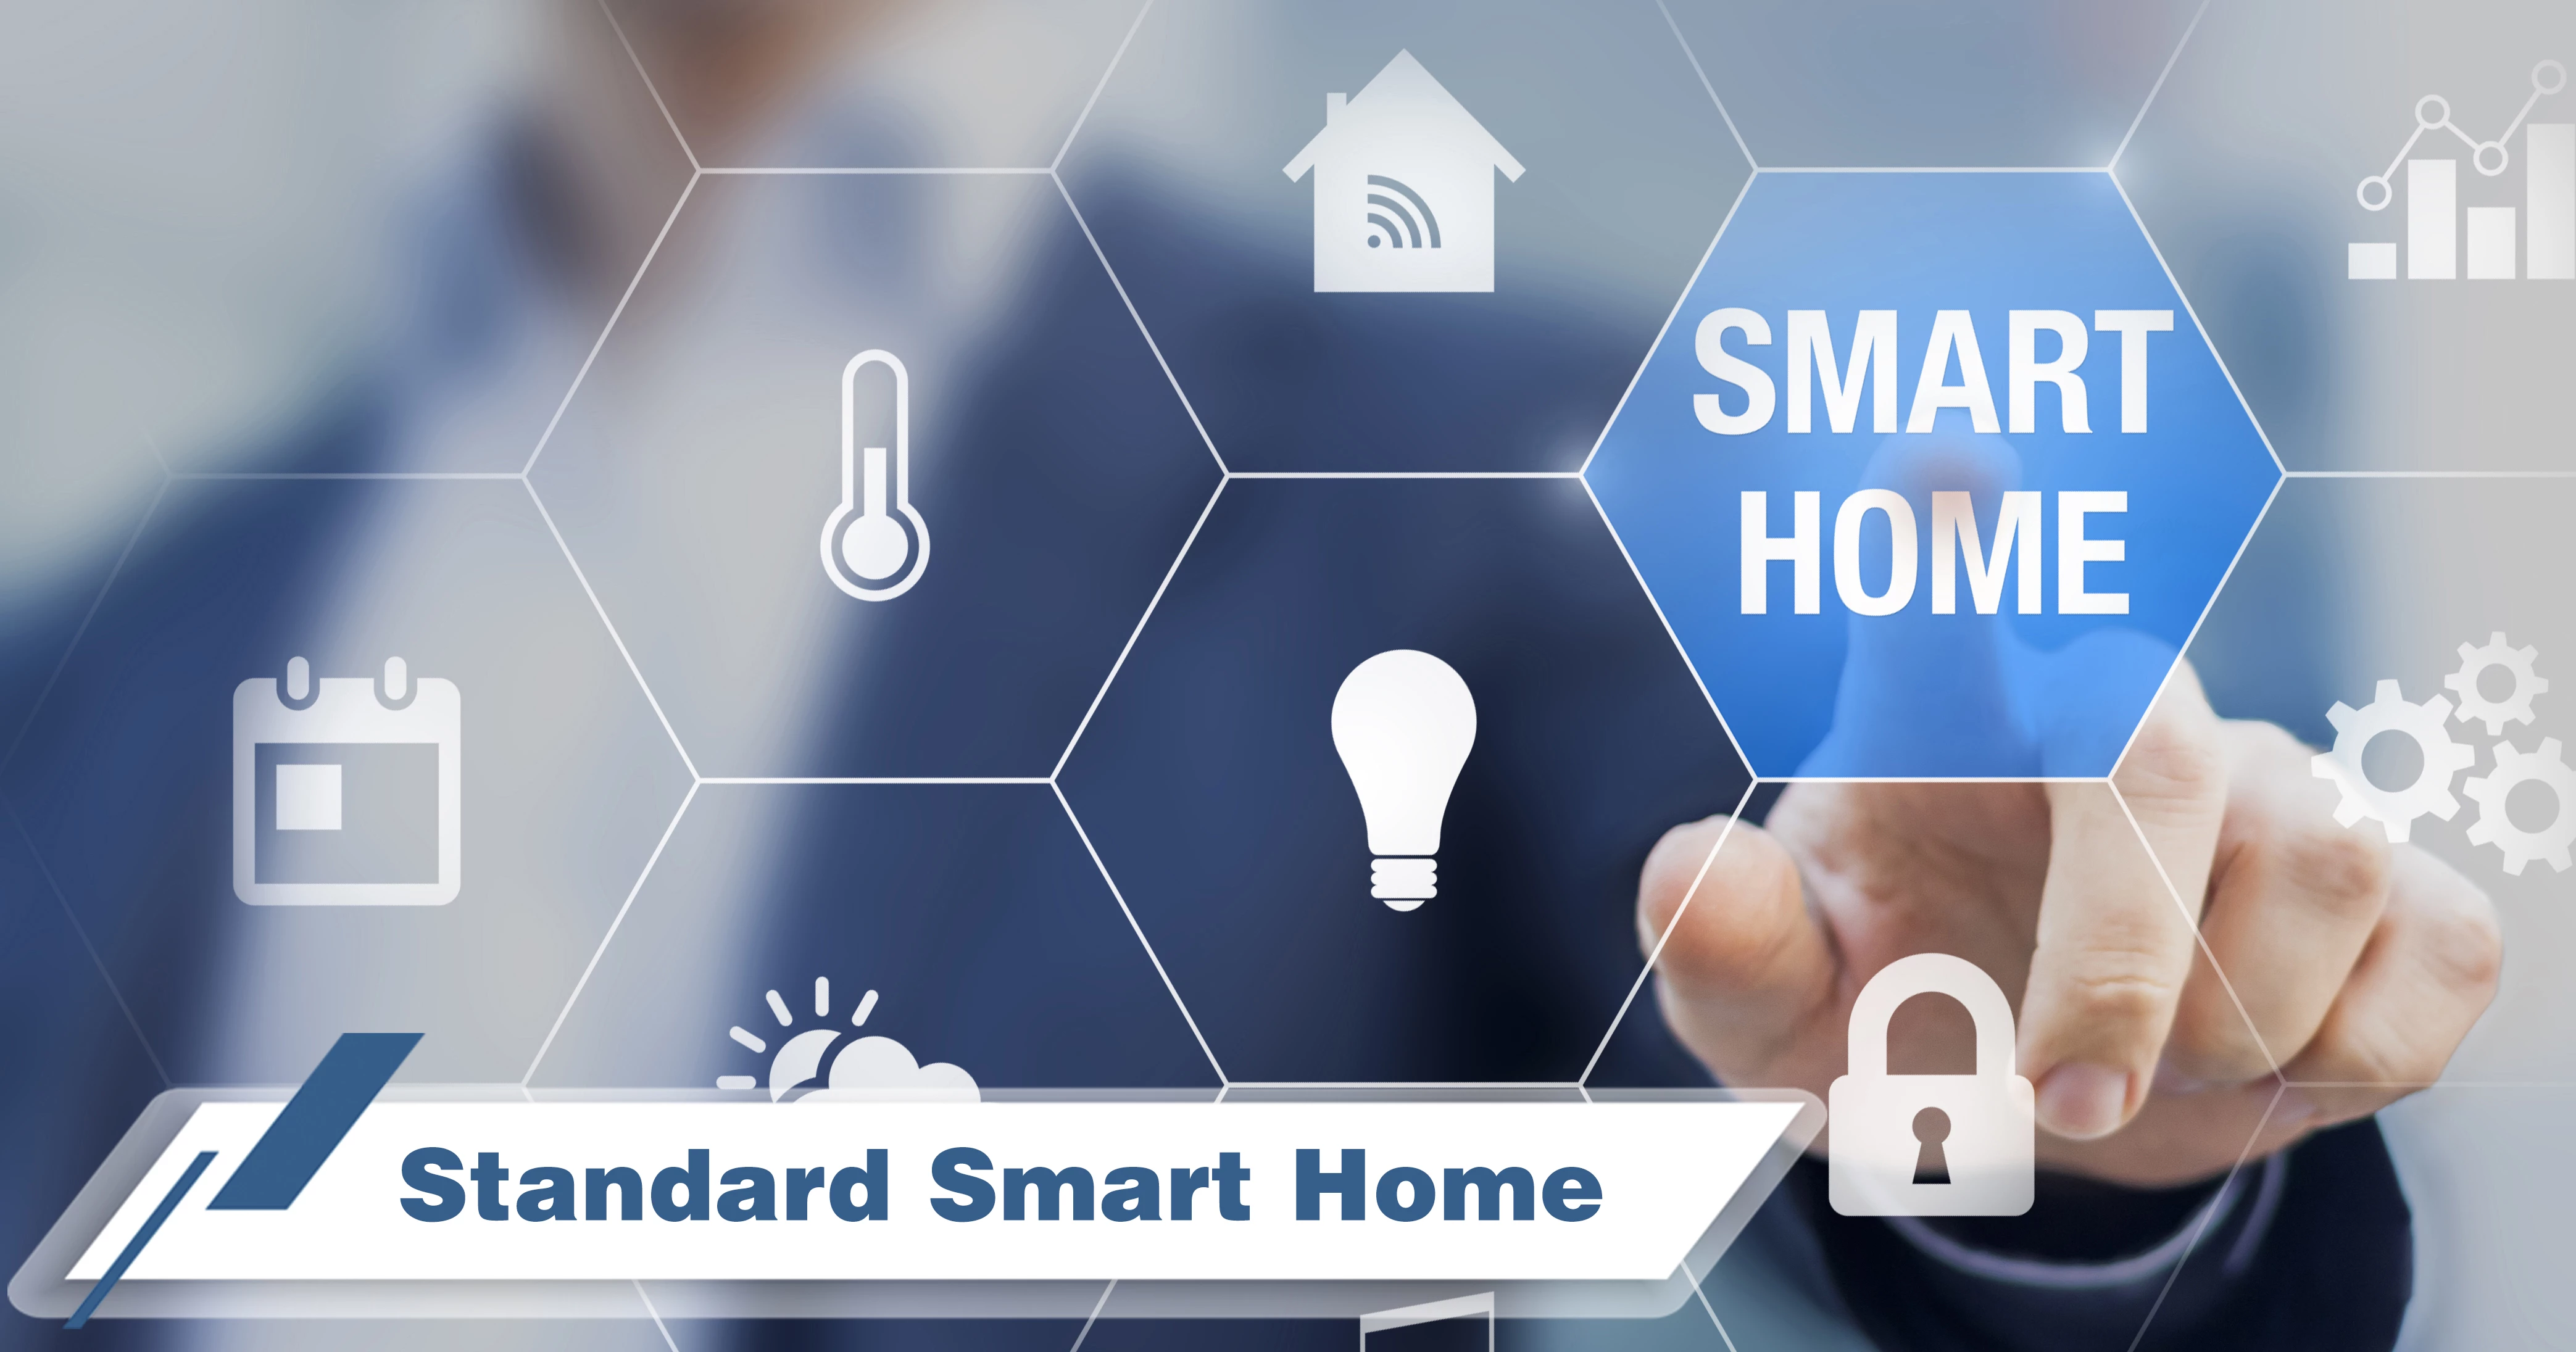 Standard smart home makes trend in technological architecture